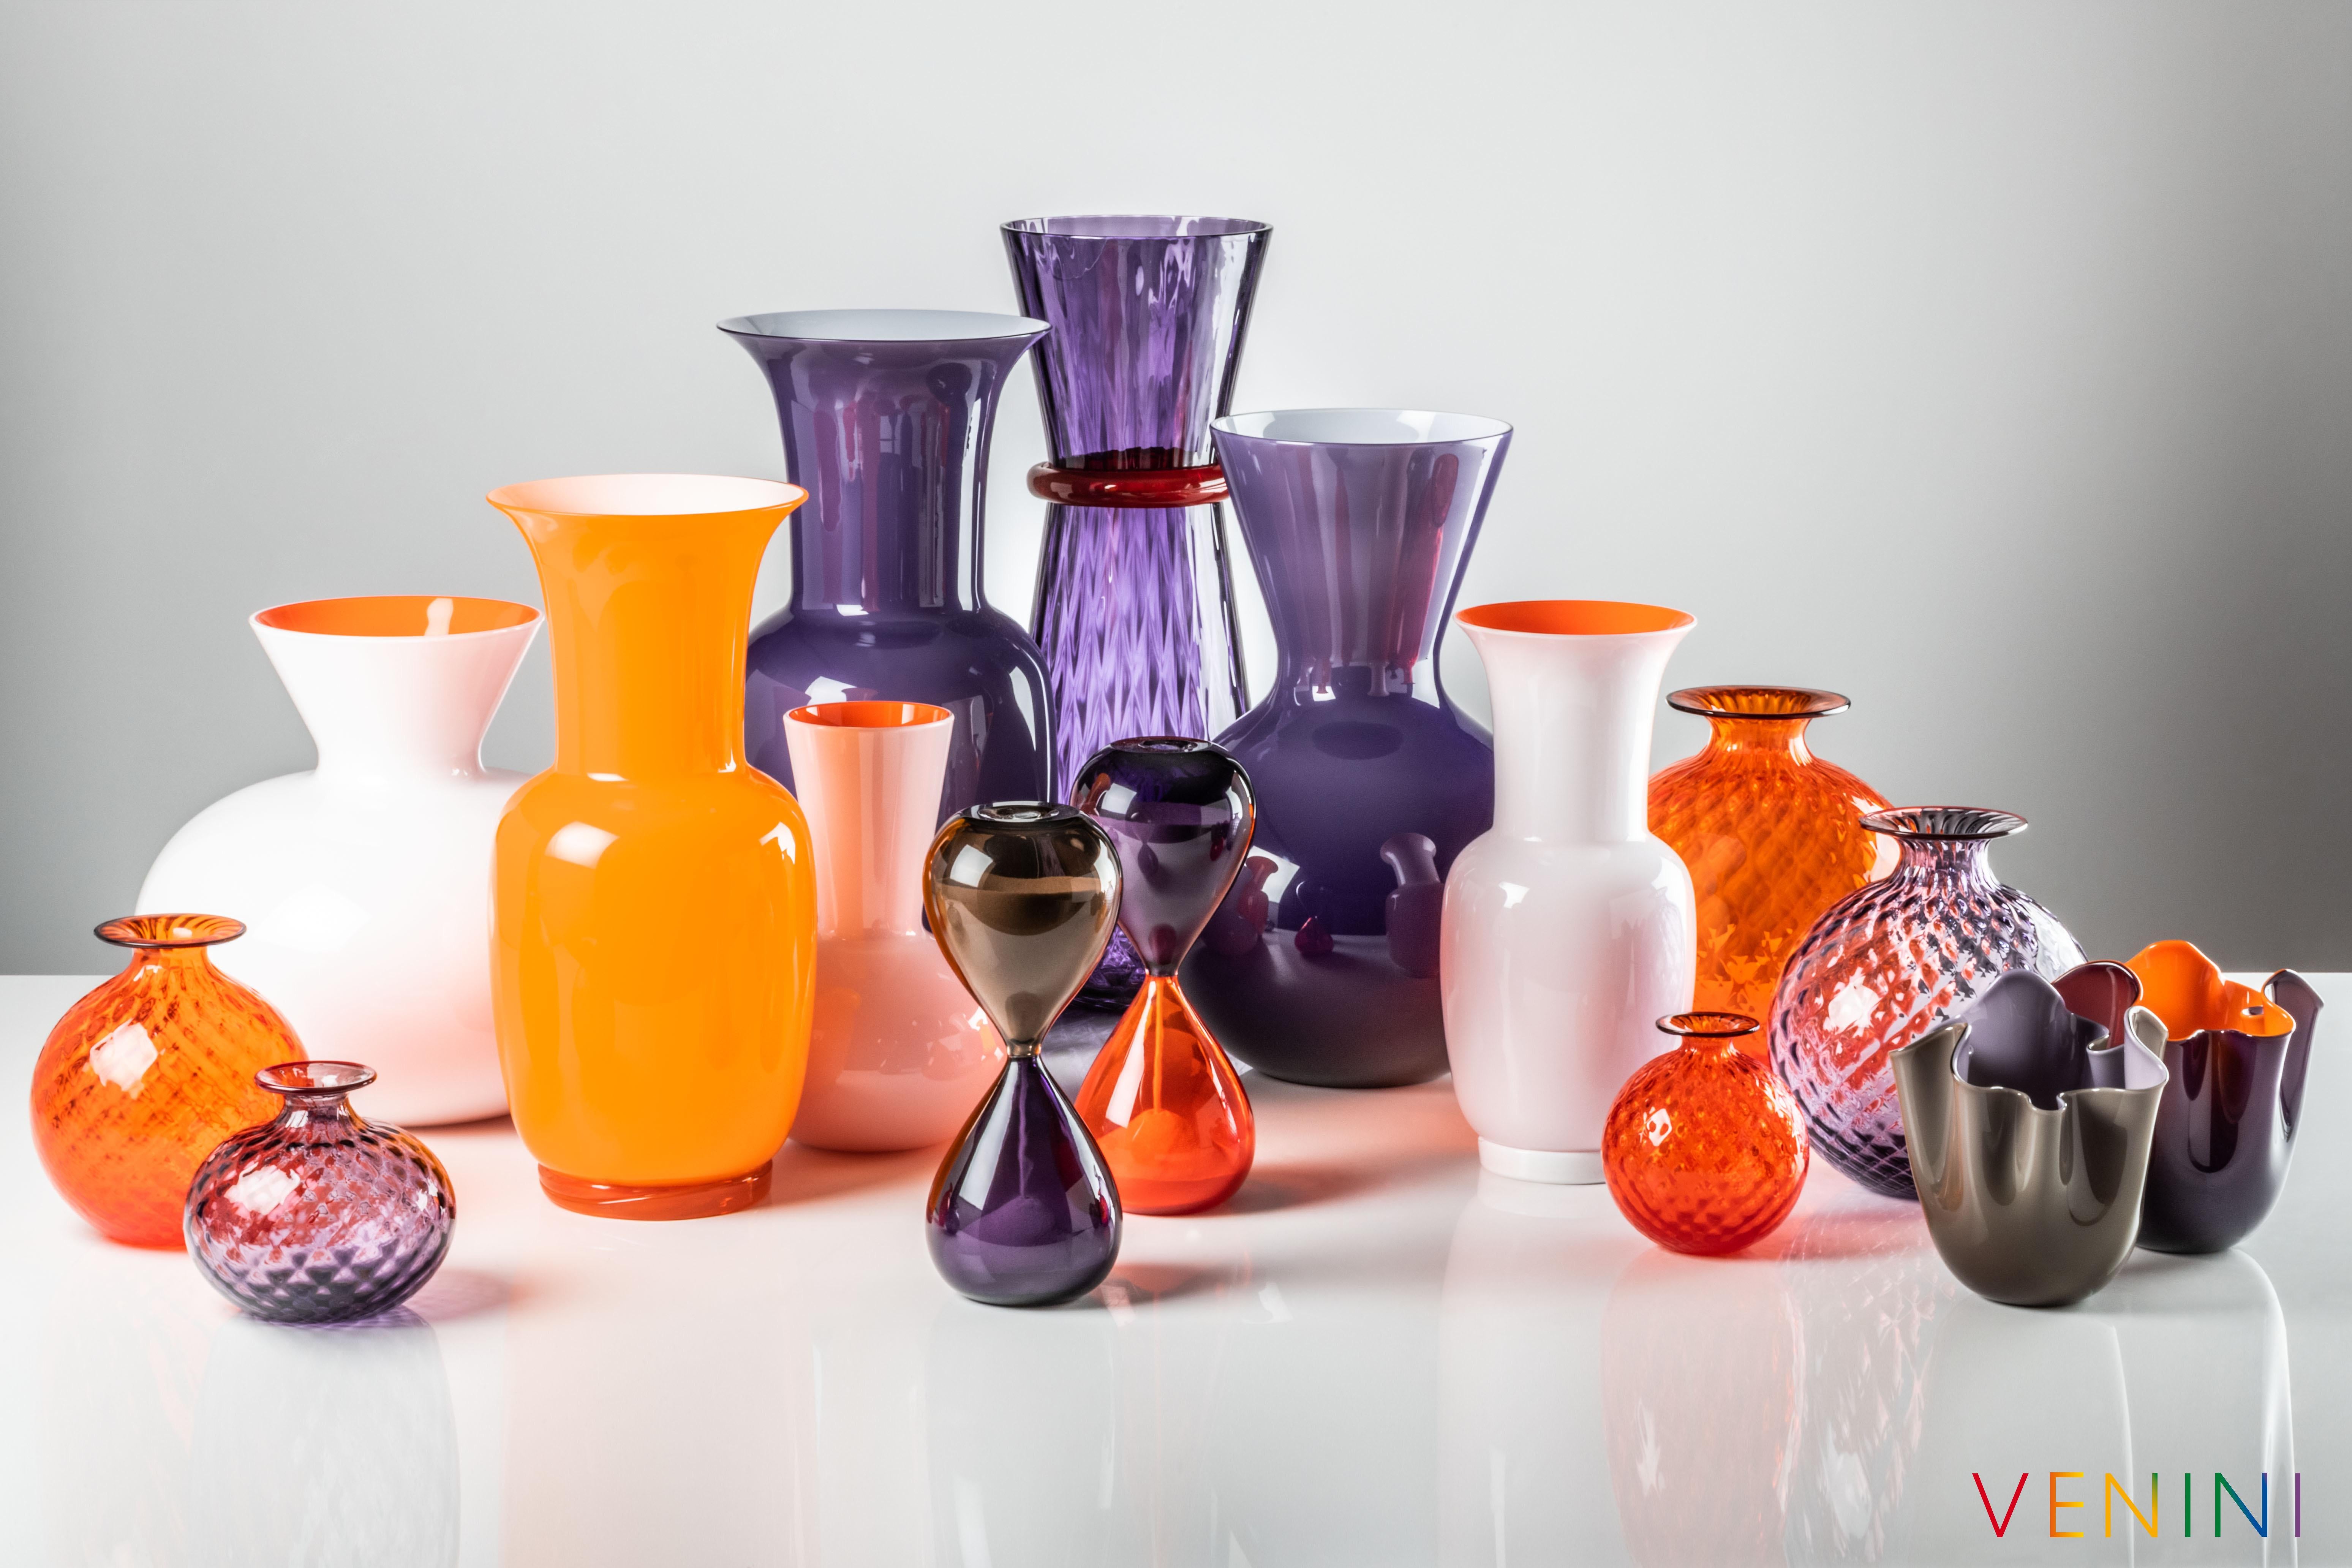 Idria glass vase series, designed and manufactured by Venini, features three different shaped vases. Indoor use only.

Dimensions: Ø 26, H 36 cm.